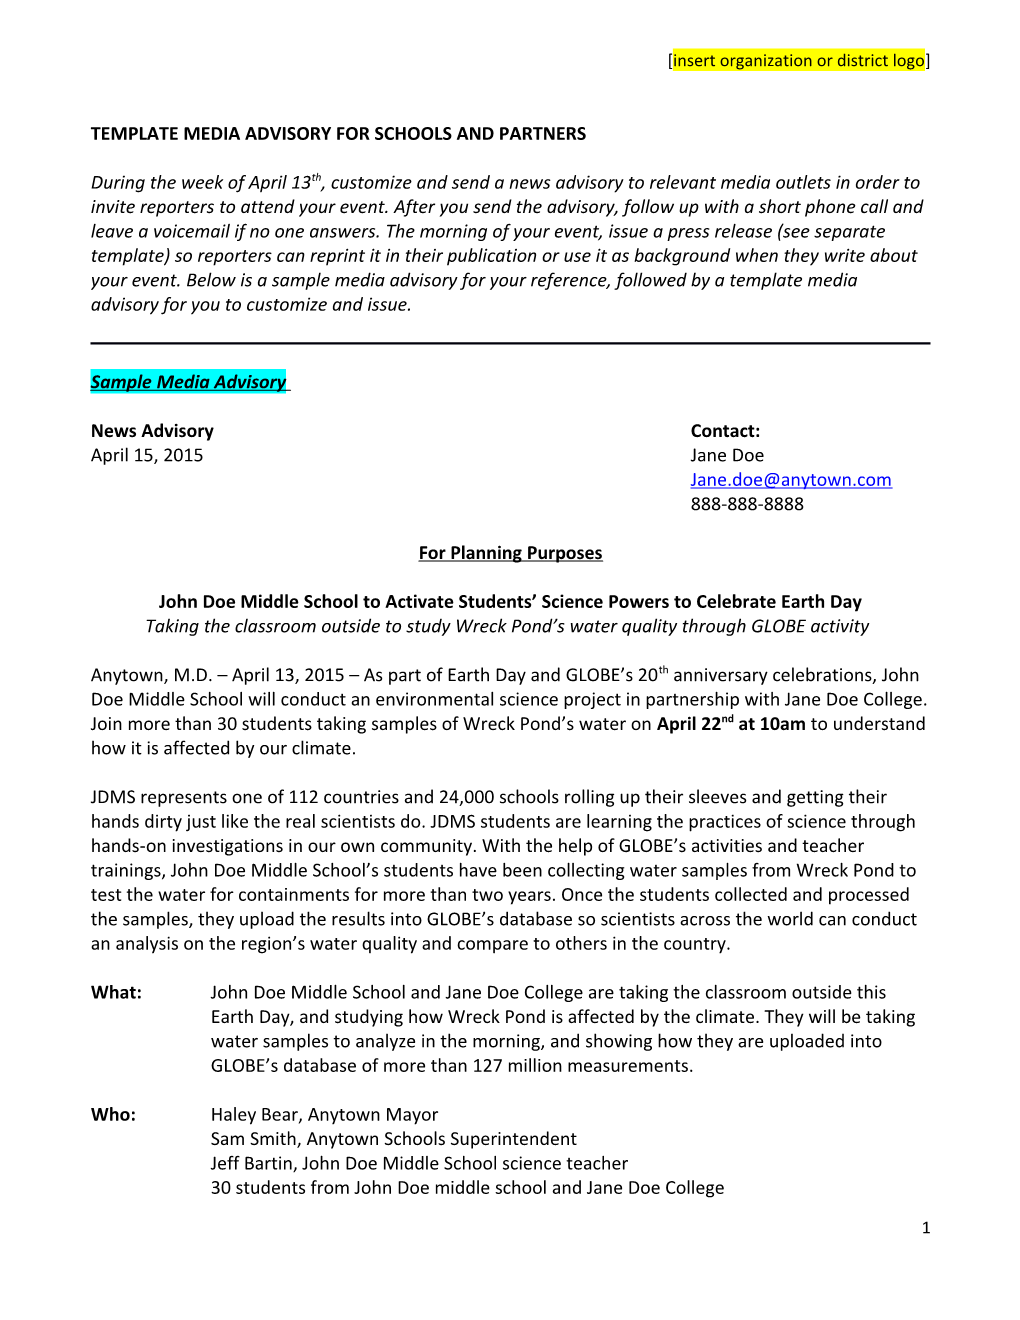 Template Media Advisory for Schools and Partners